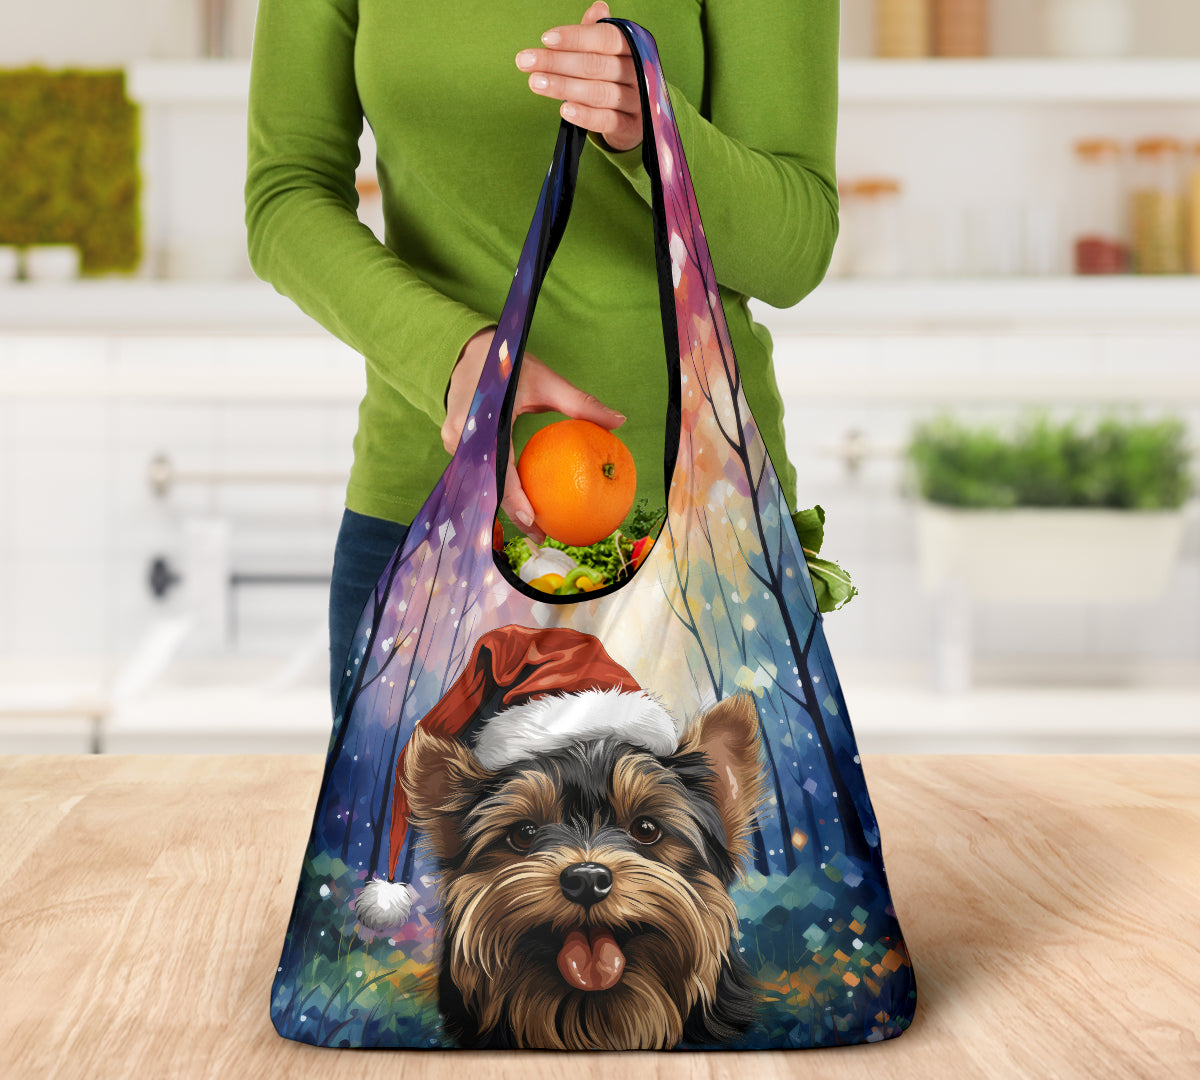 Yorkshire Terrier (Yorkie) Design 3 Pack Grocery Bags - 2023 Holiday - Christmas Print